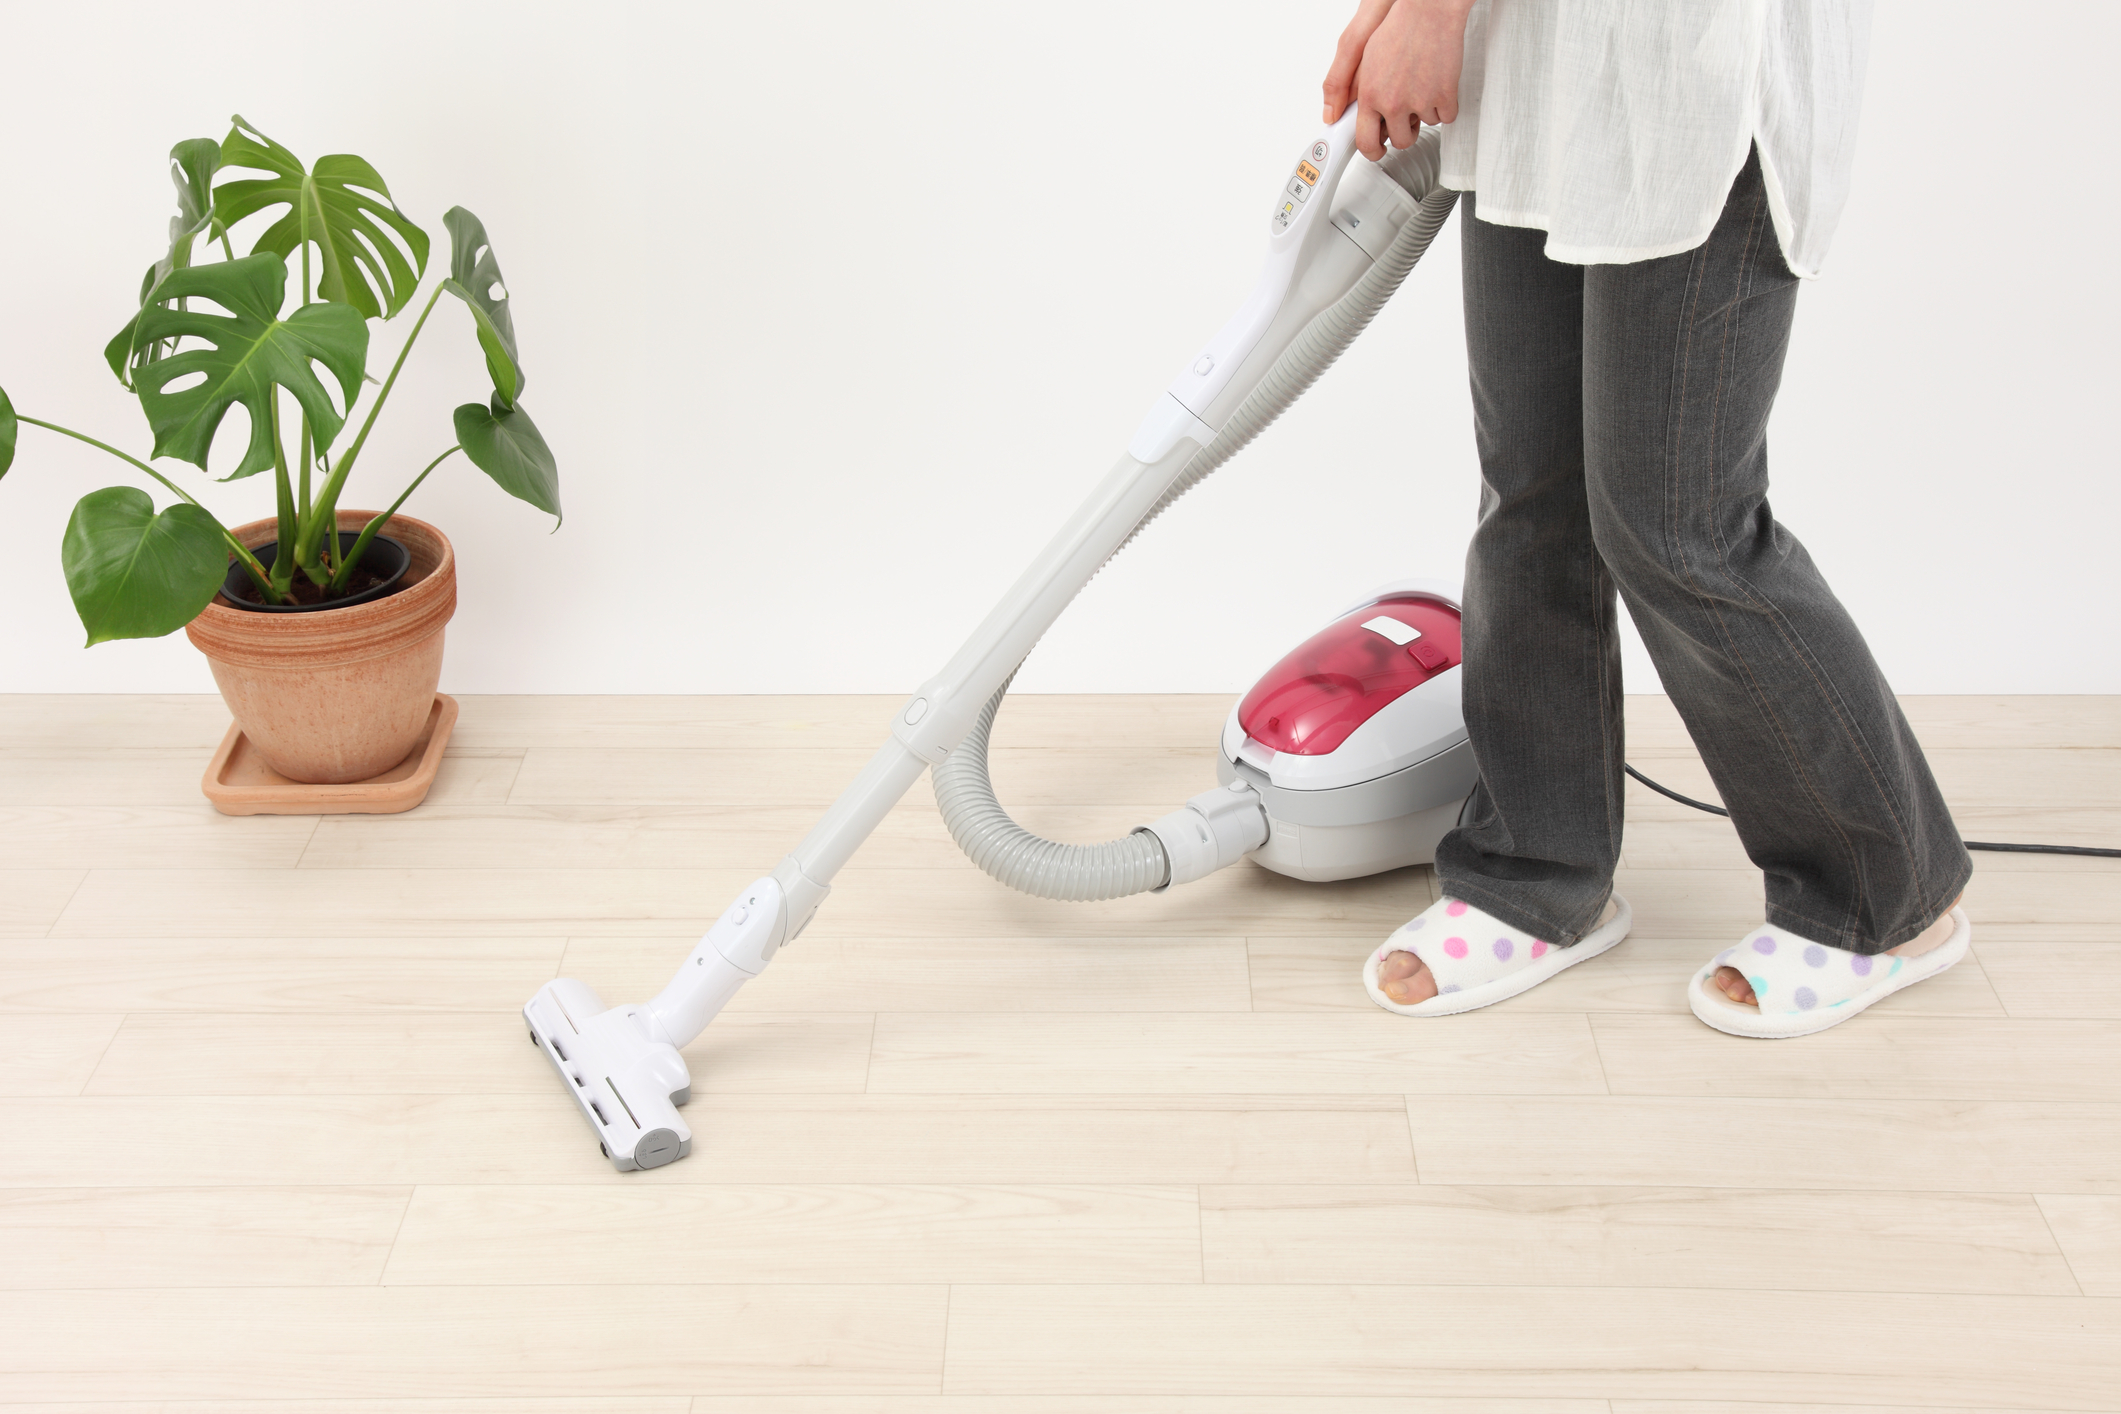 Cleaning the house is a simple and effective physical activity.